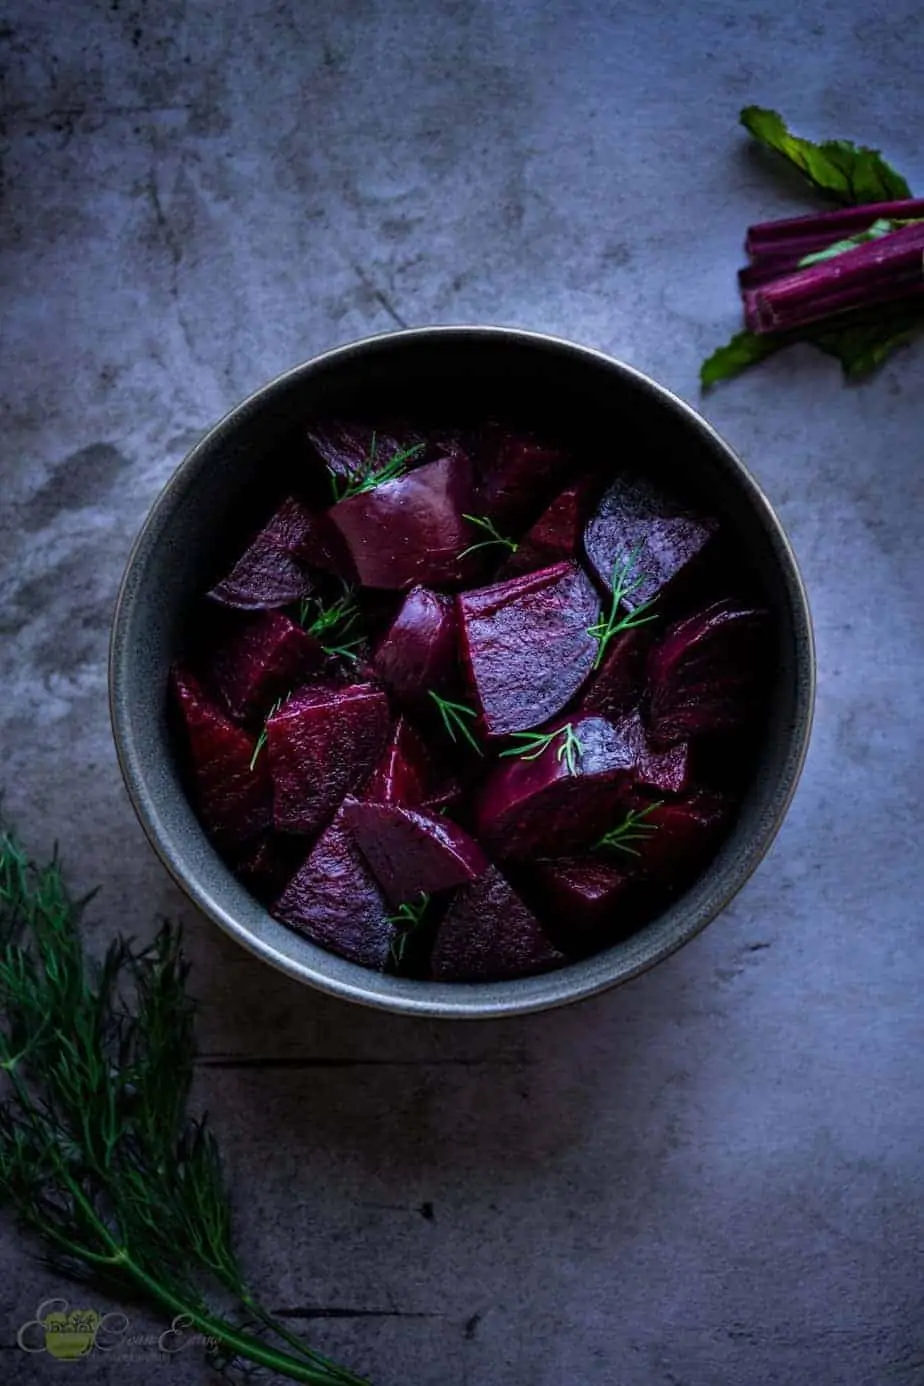 fully cooked beets in a bowl with some dill for garnish.